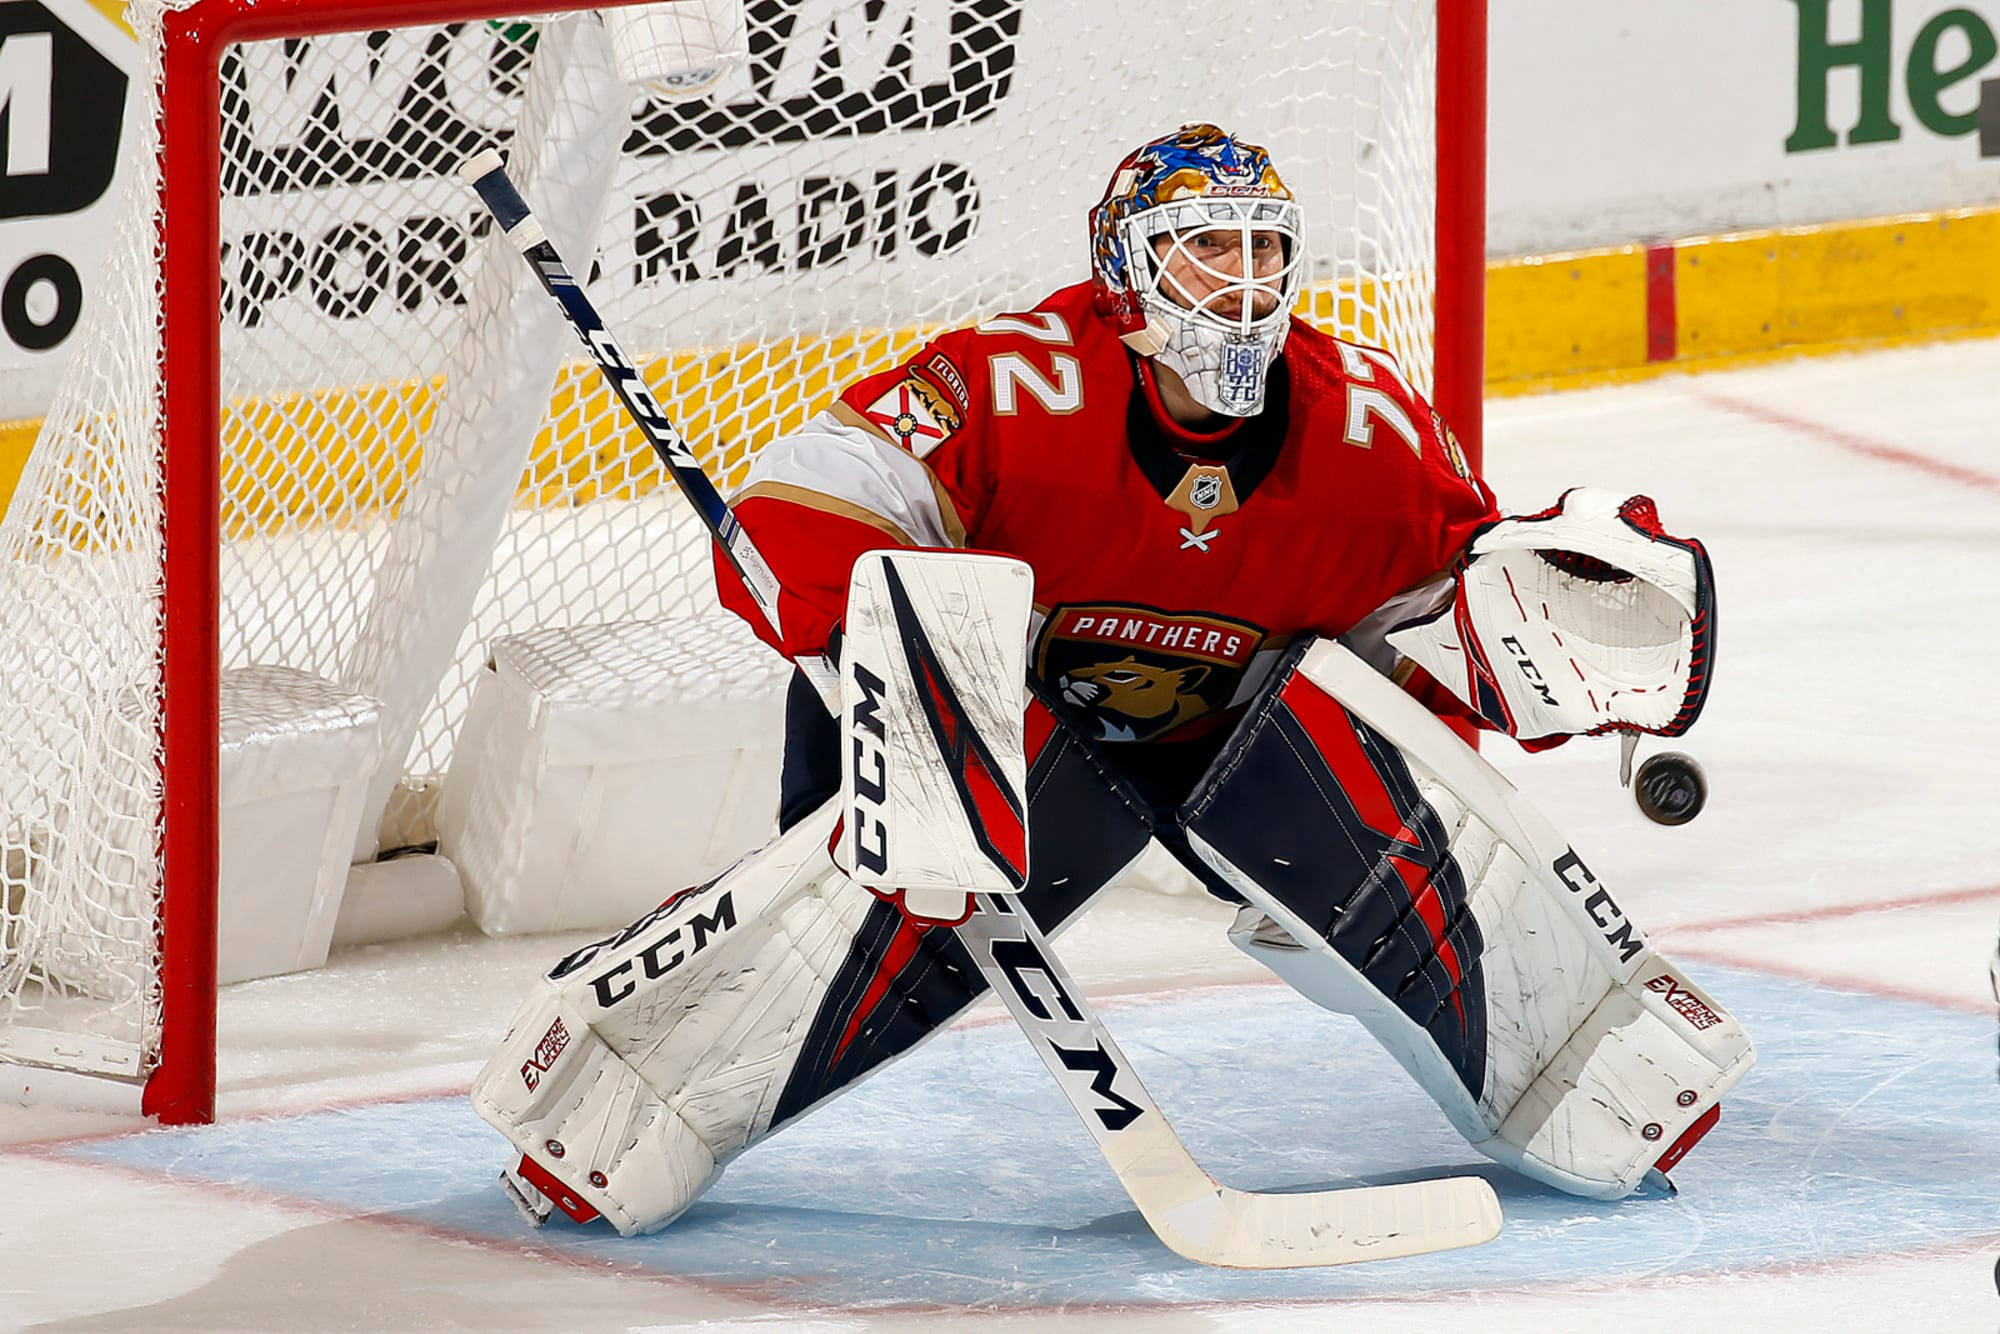 Panthers' Bobrovsky Has Been Stellar Between the Pipes This Season